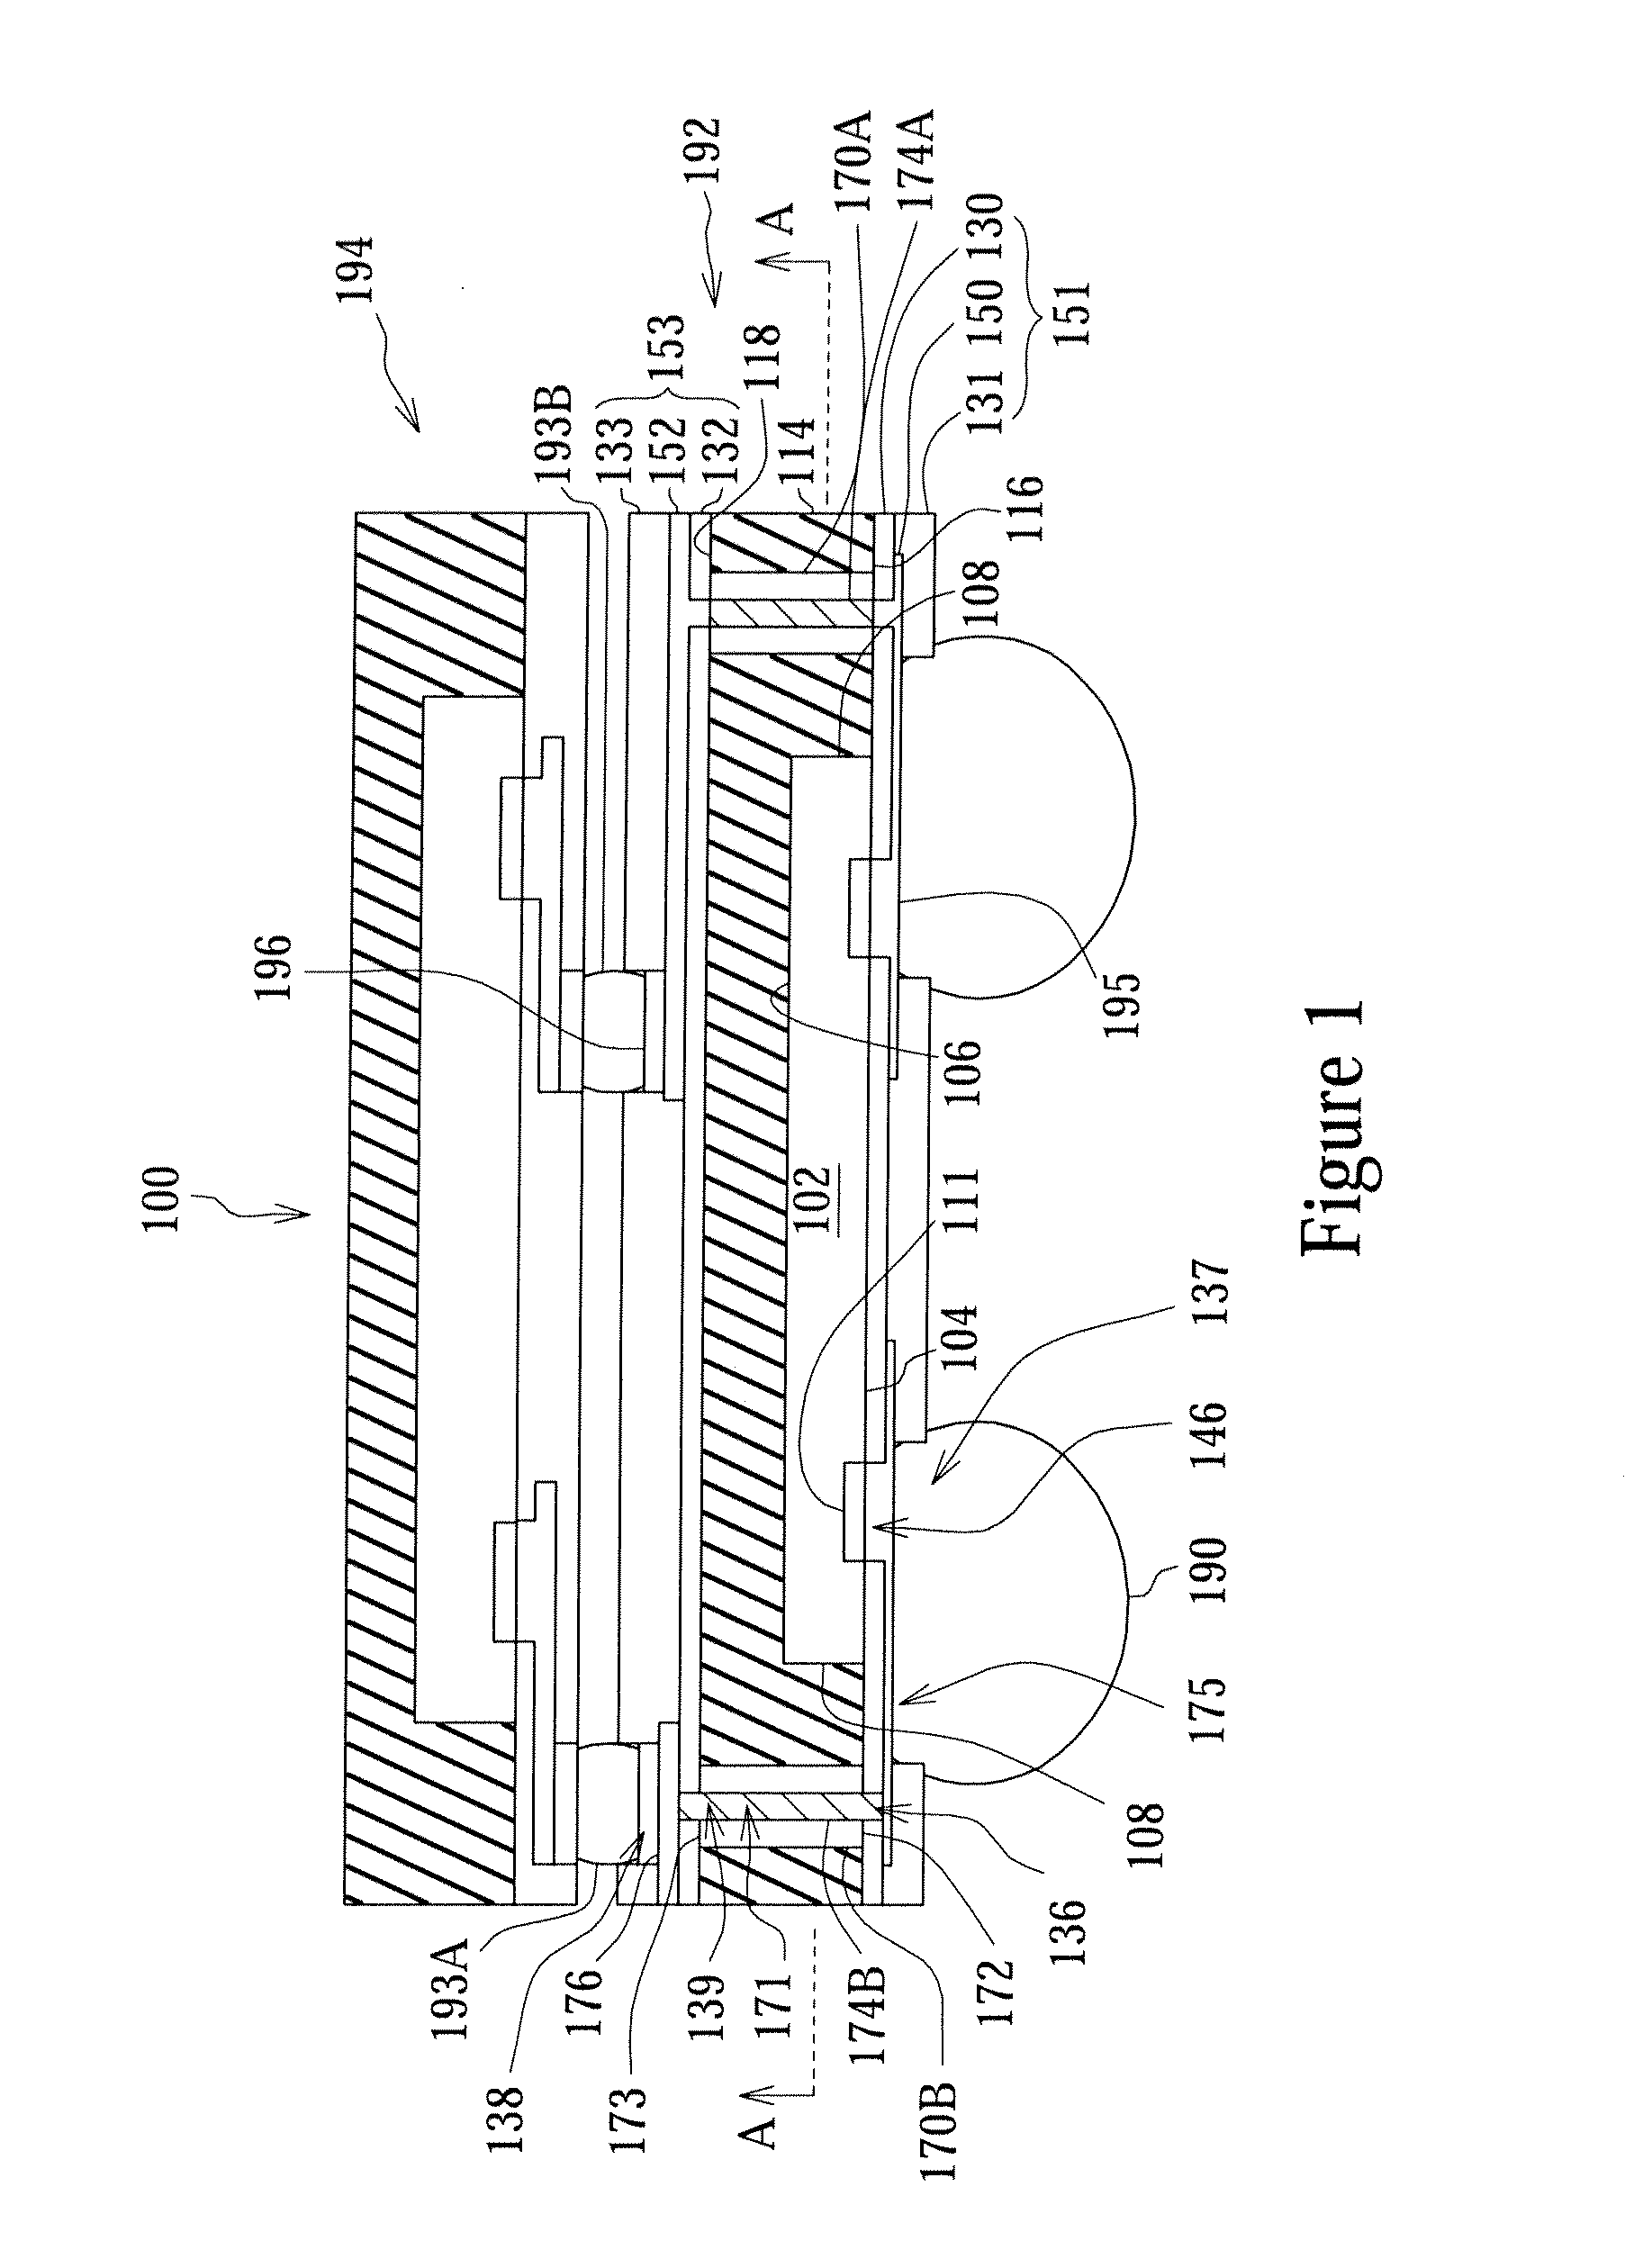 Wafer level semiconductor package and manufacturing methods thereof